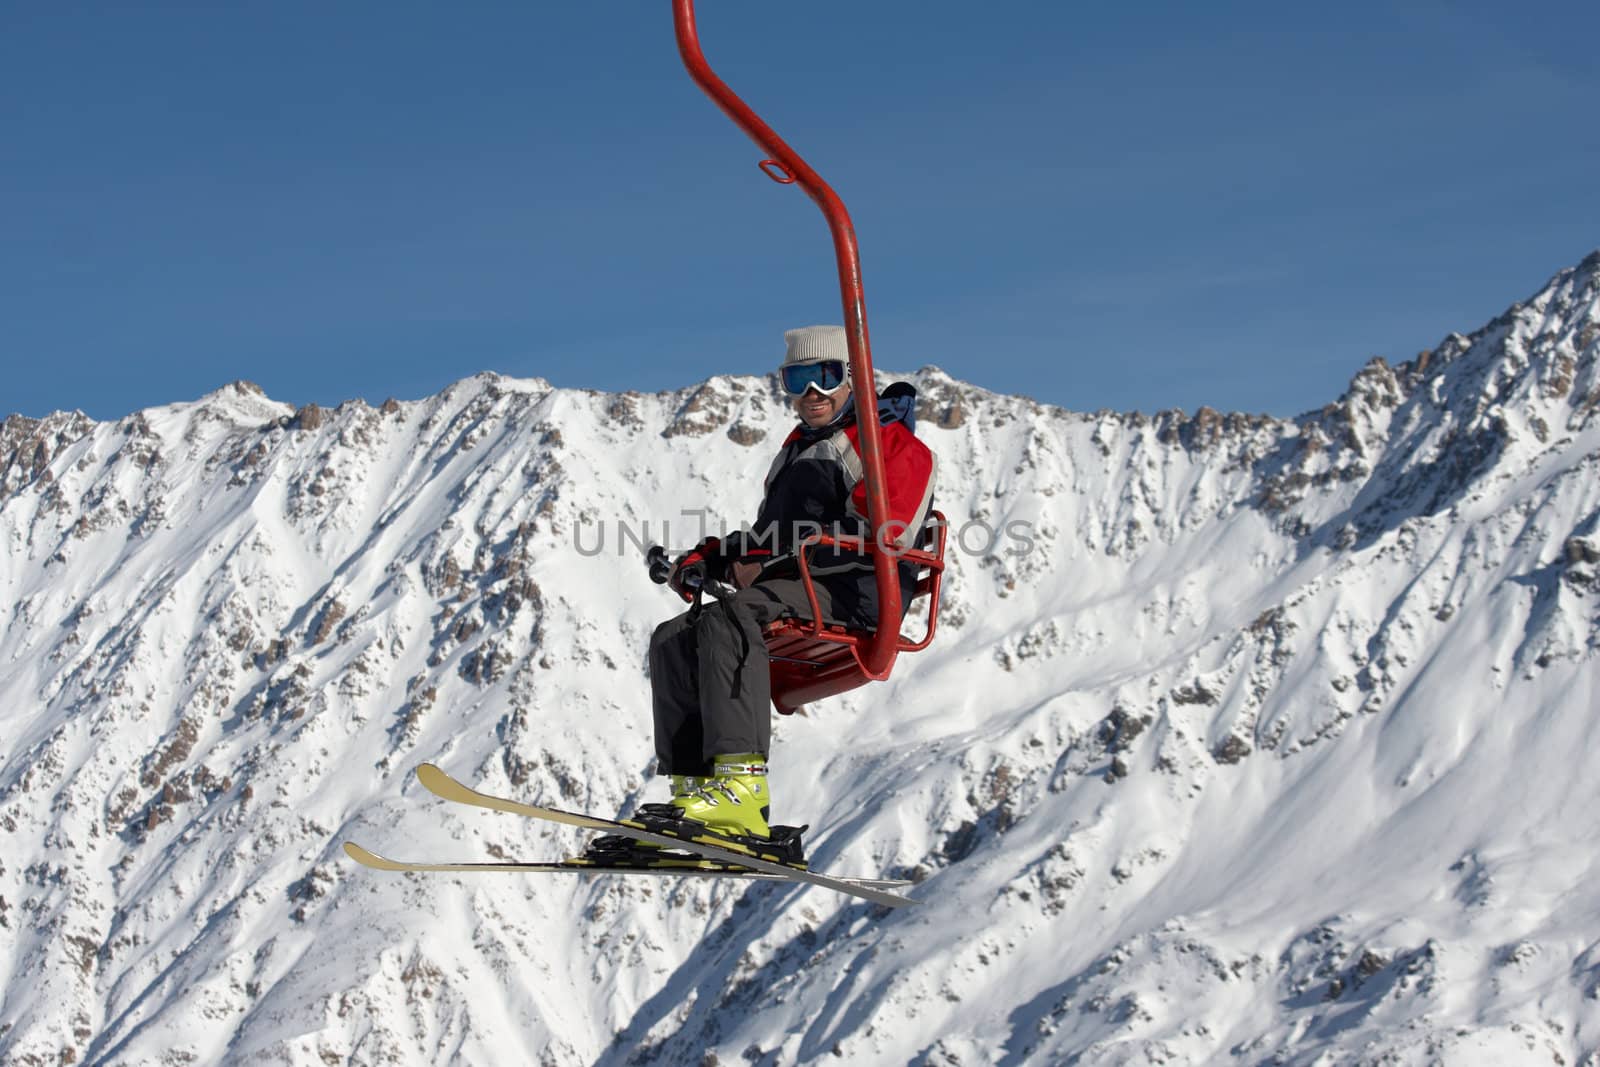 skier mowing up on ski lift under mountains